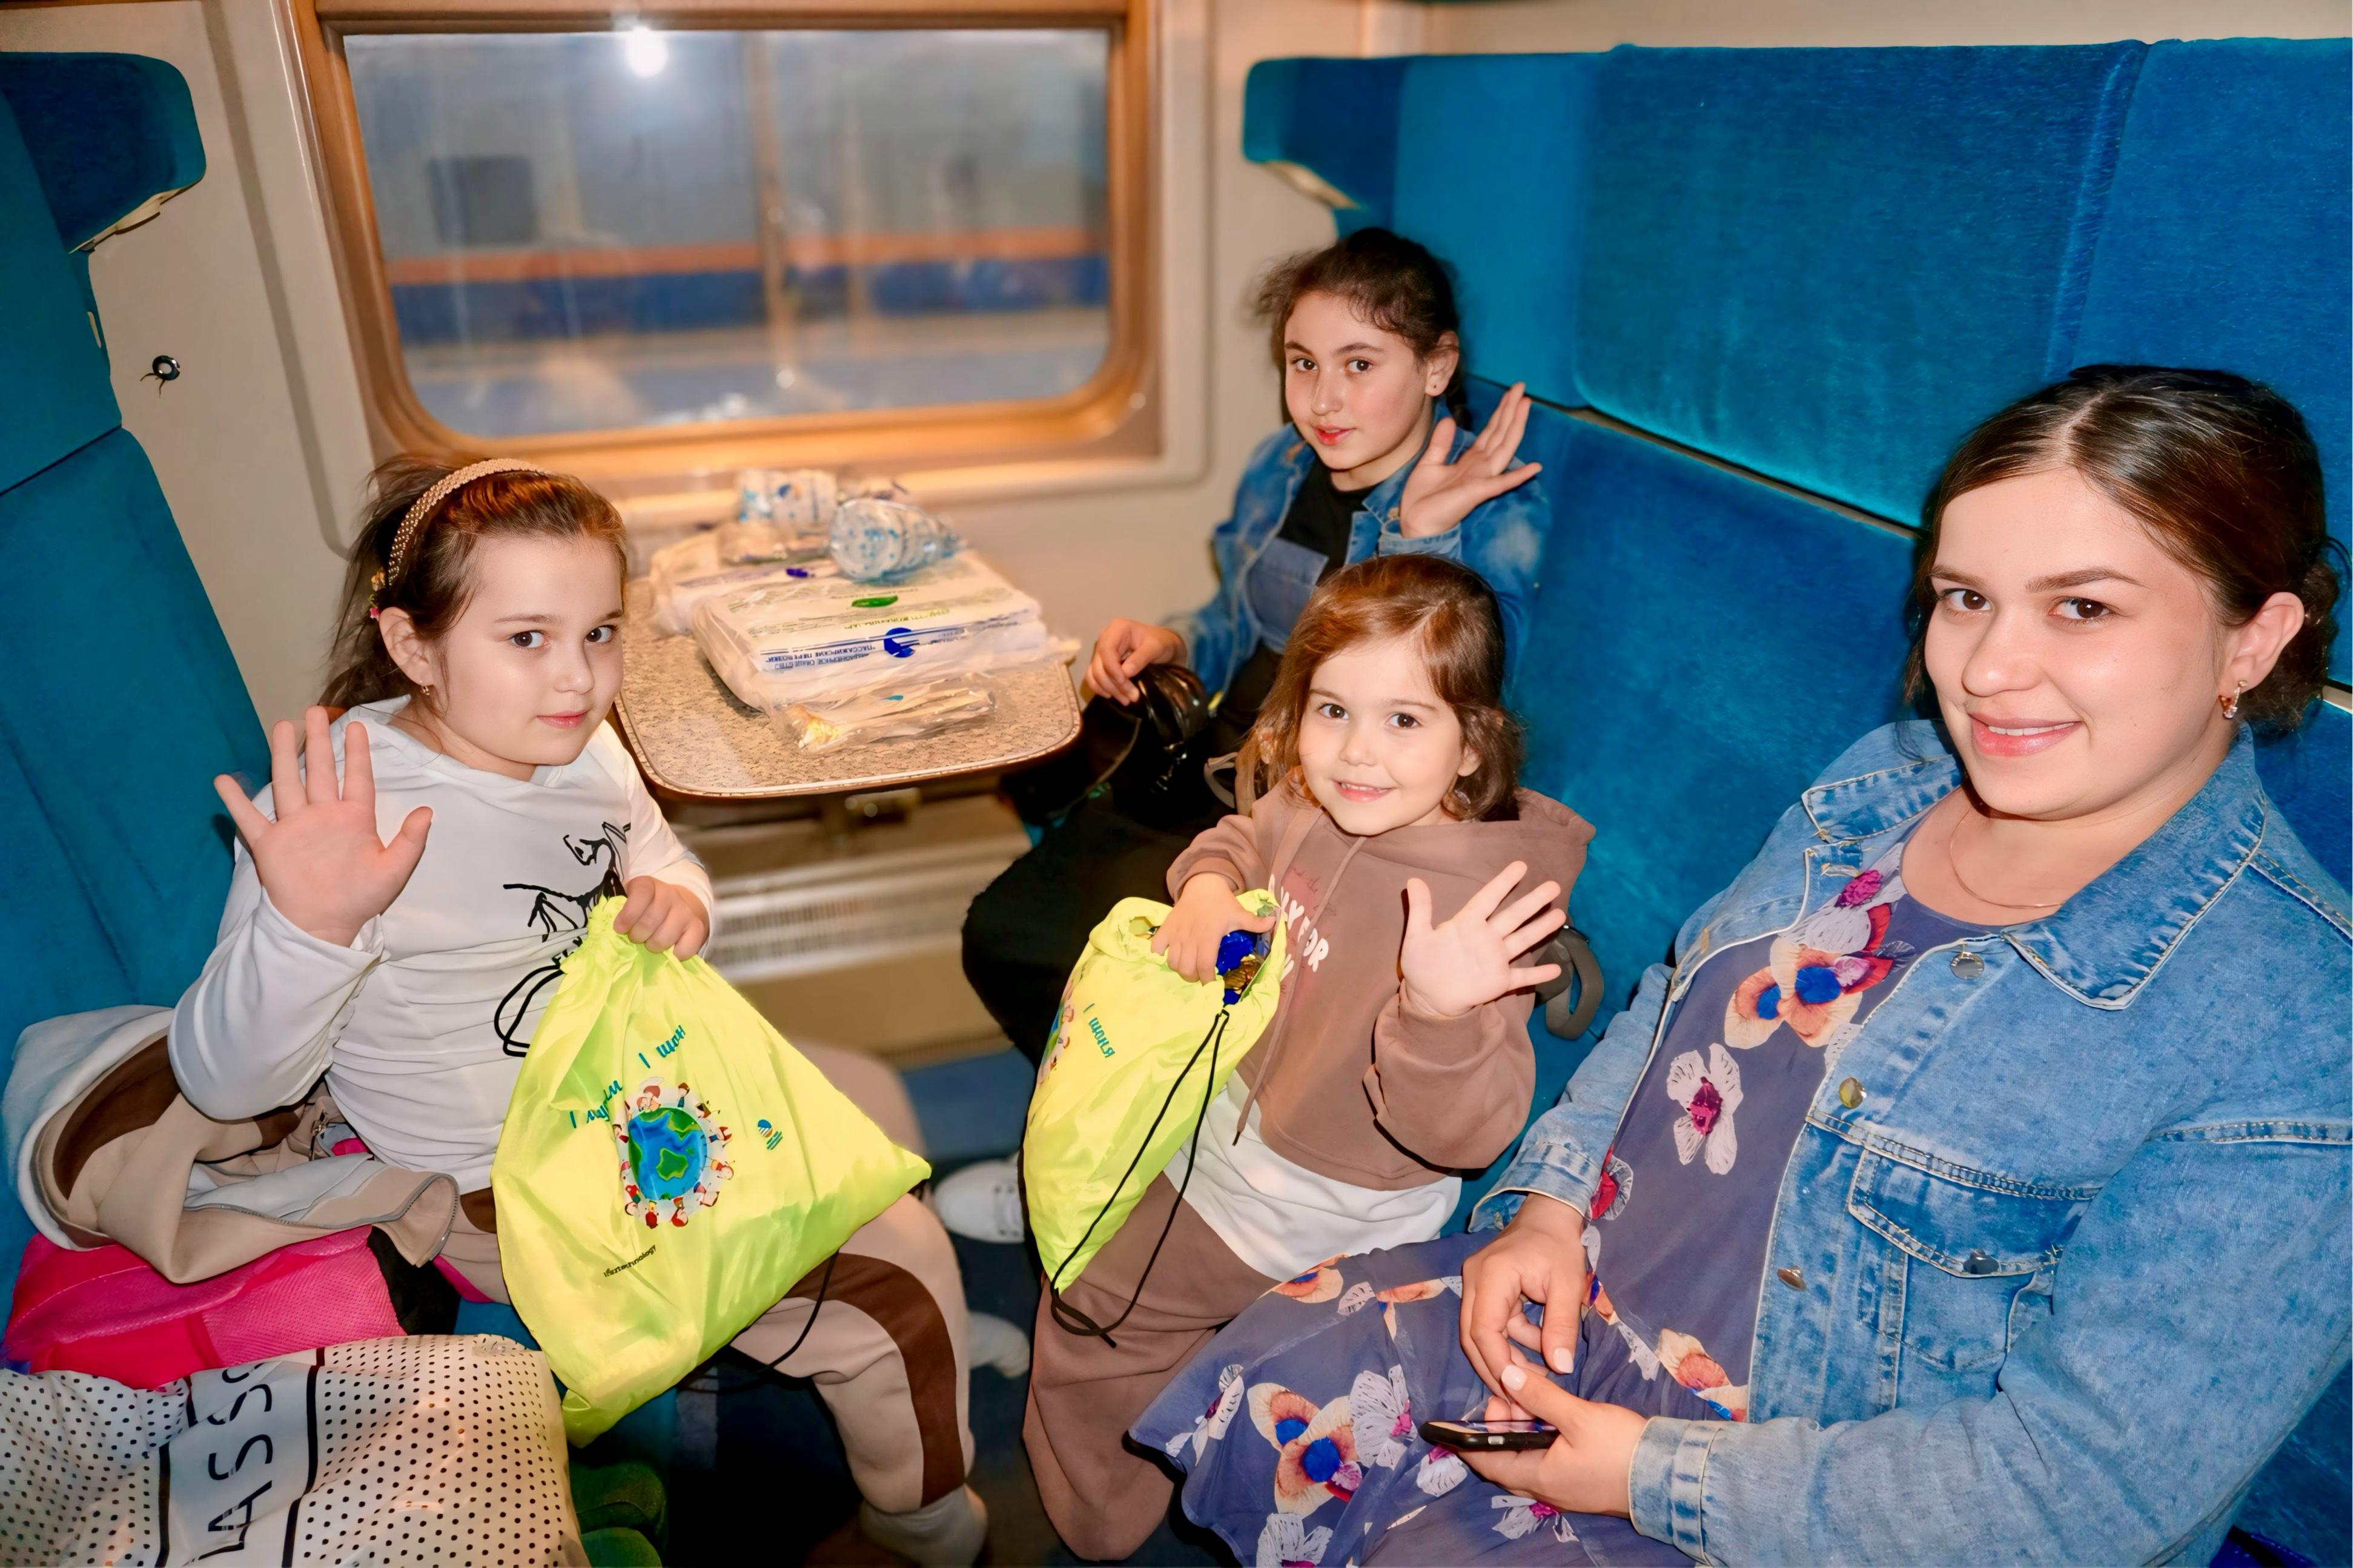 The national carrier held a campaign to present gifts to young passengers on Children's Day